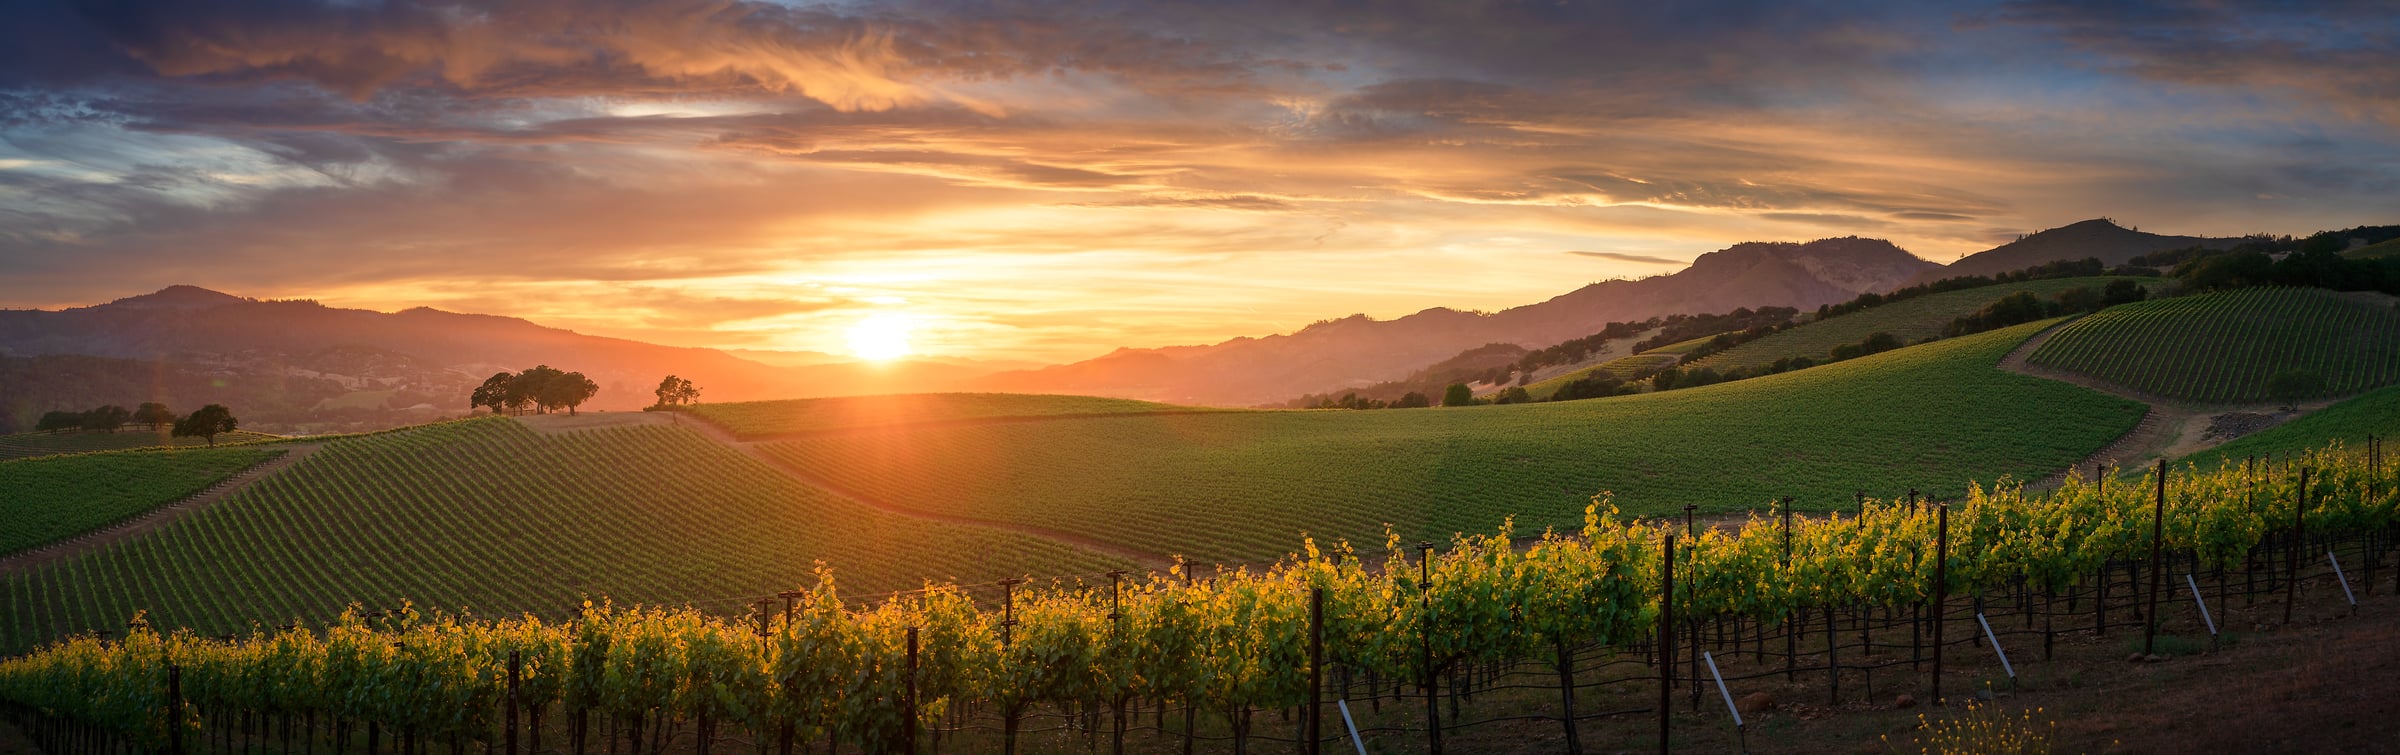 127 megapixels! A very high resolution, large-format VAST photo print of a vineyard in Sonoma, California at sunset; landscape photograph created by Jeff Lewis.